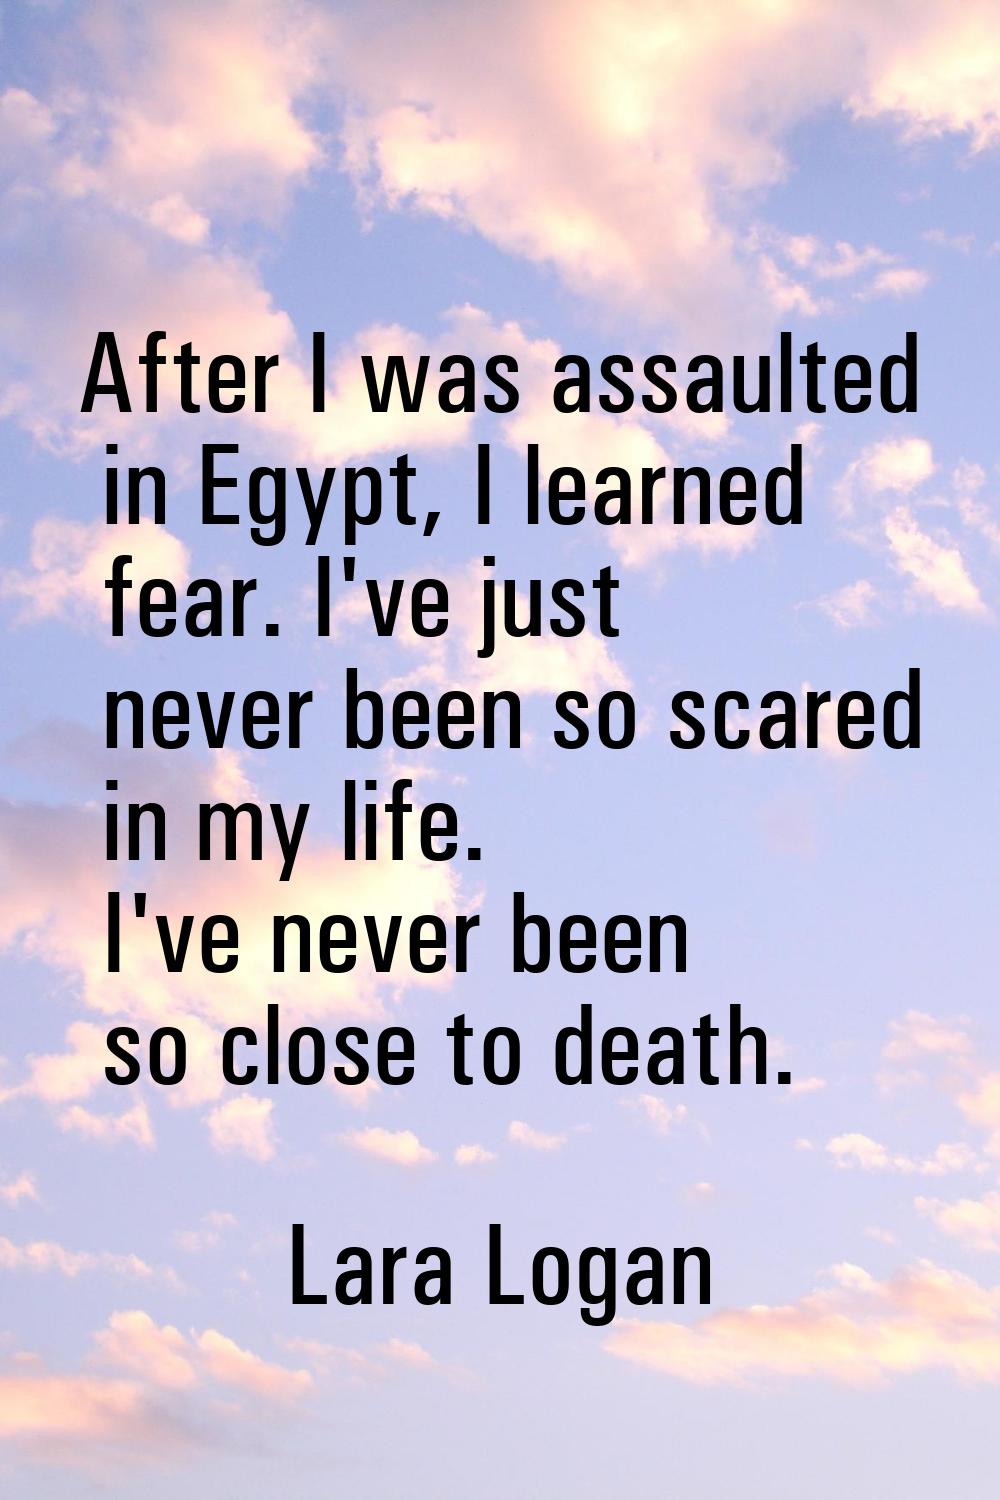 After I was assaulted in Egypt, I learned fear. I've just never been so scared in my life. I've nev